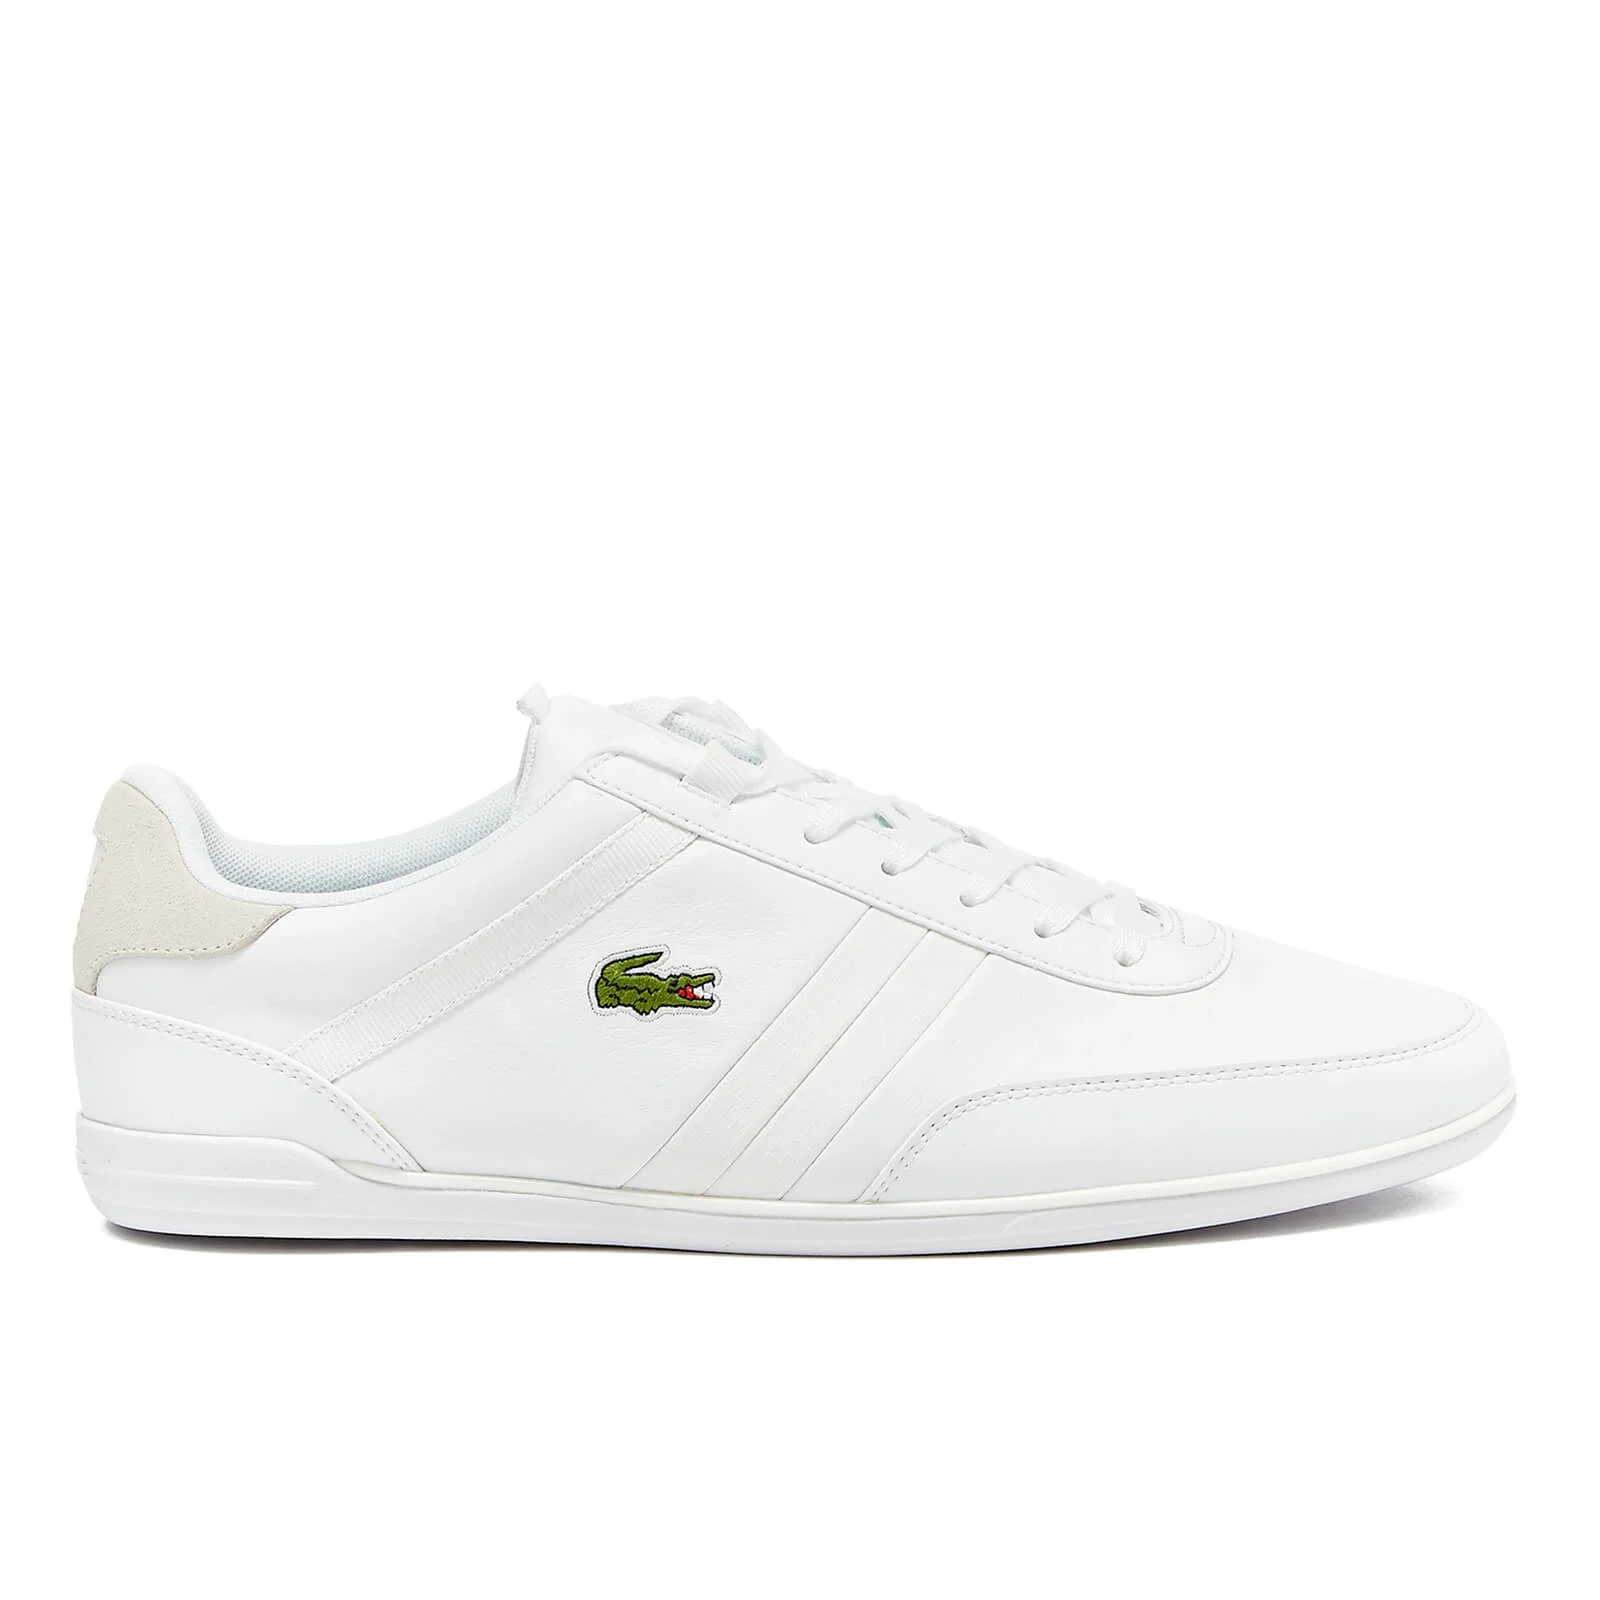 Lacoste Men's Giron 416 1 Low Profile Trainers - White Image 1